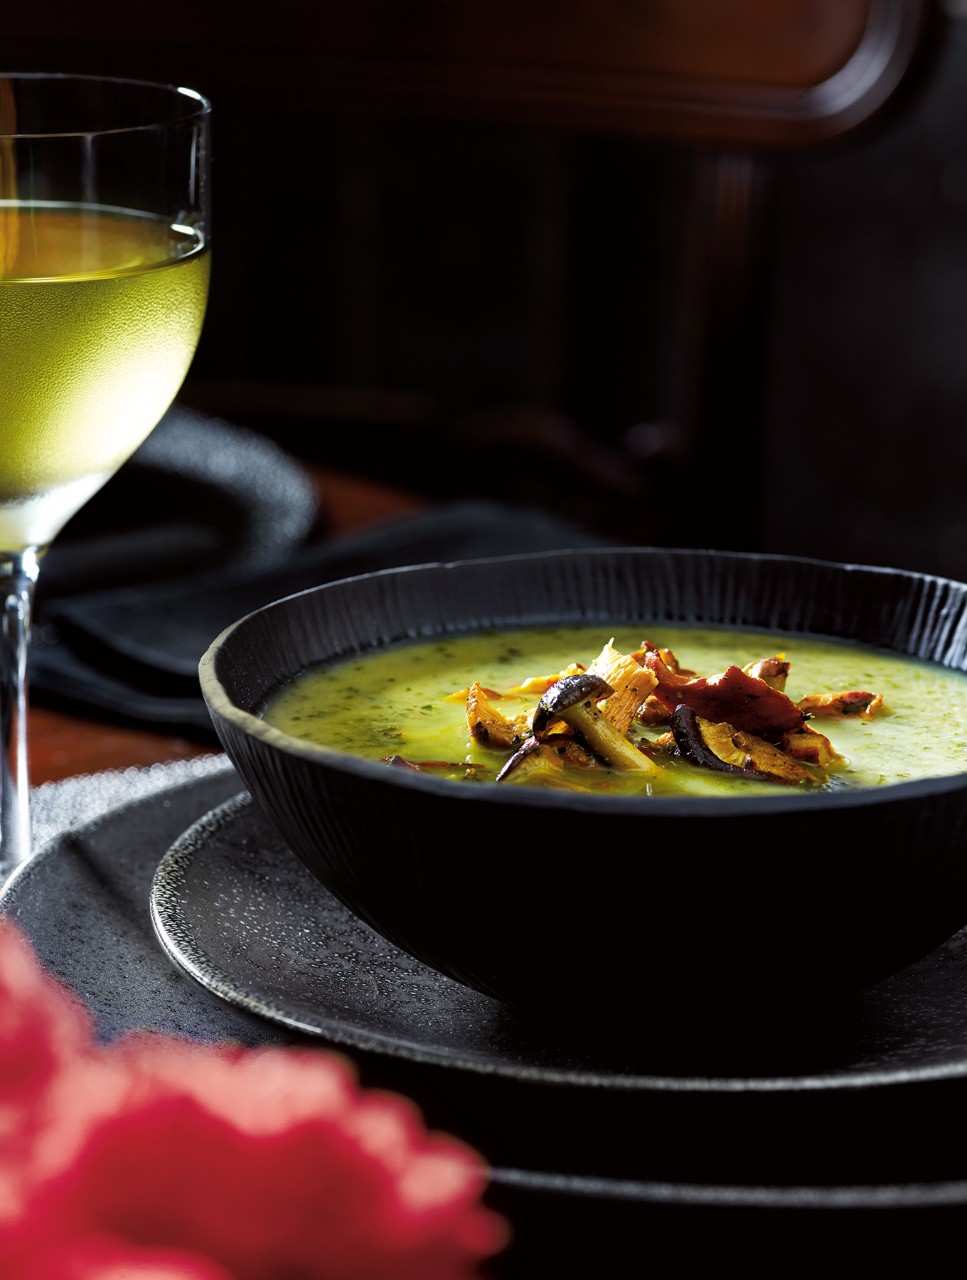 Kale & Chestnut Soup with Wild Mushrooms